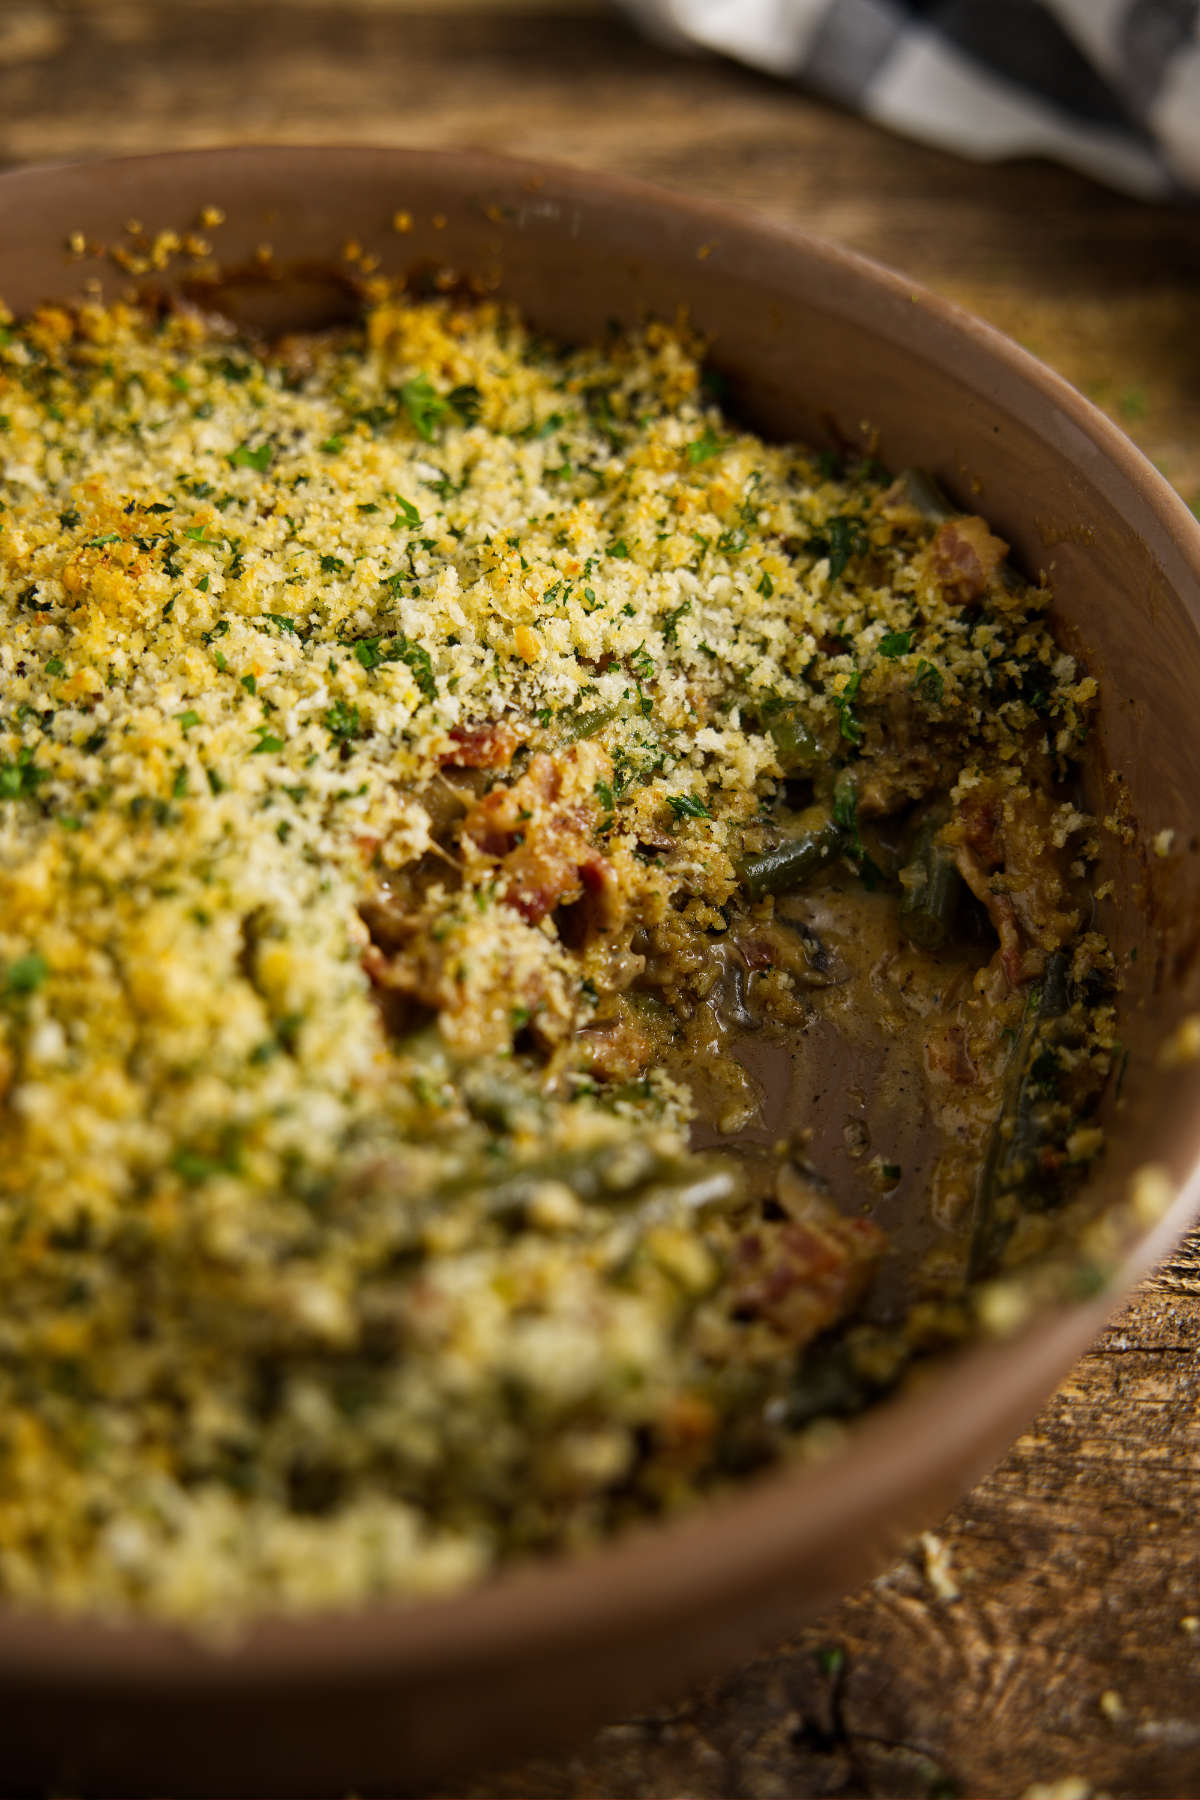 Scoop missing from casserole dish of smoked green bean casserole.